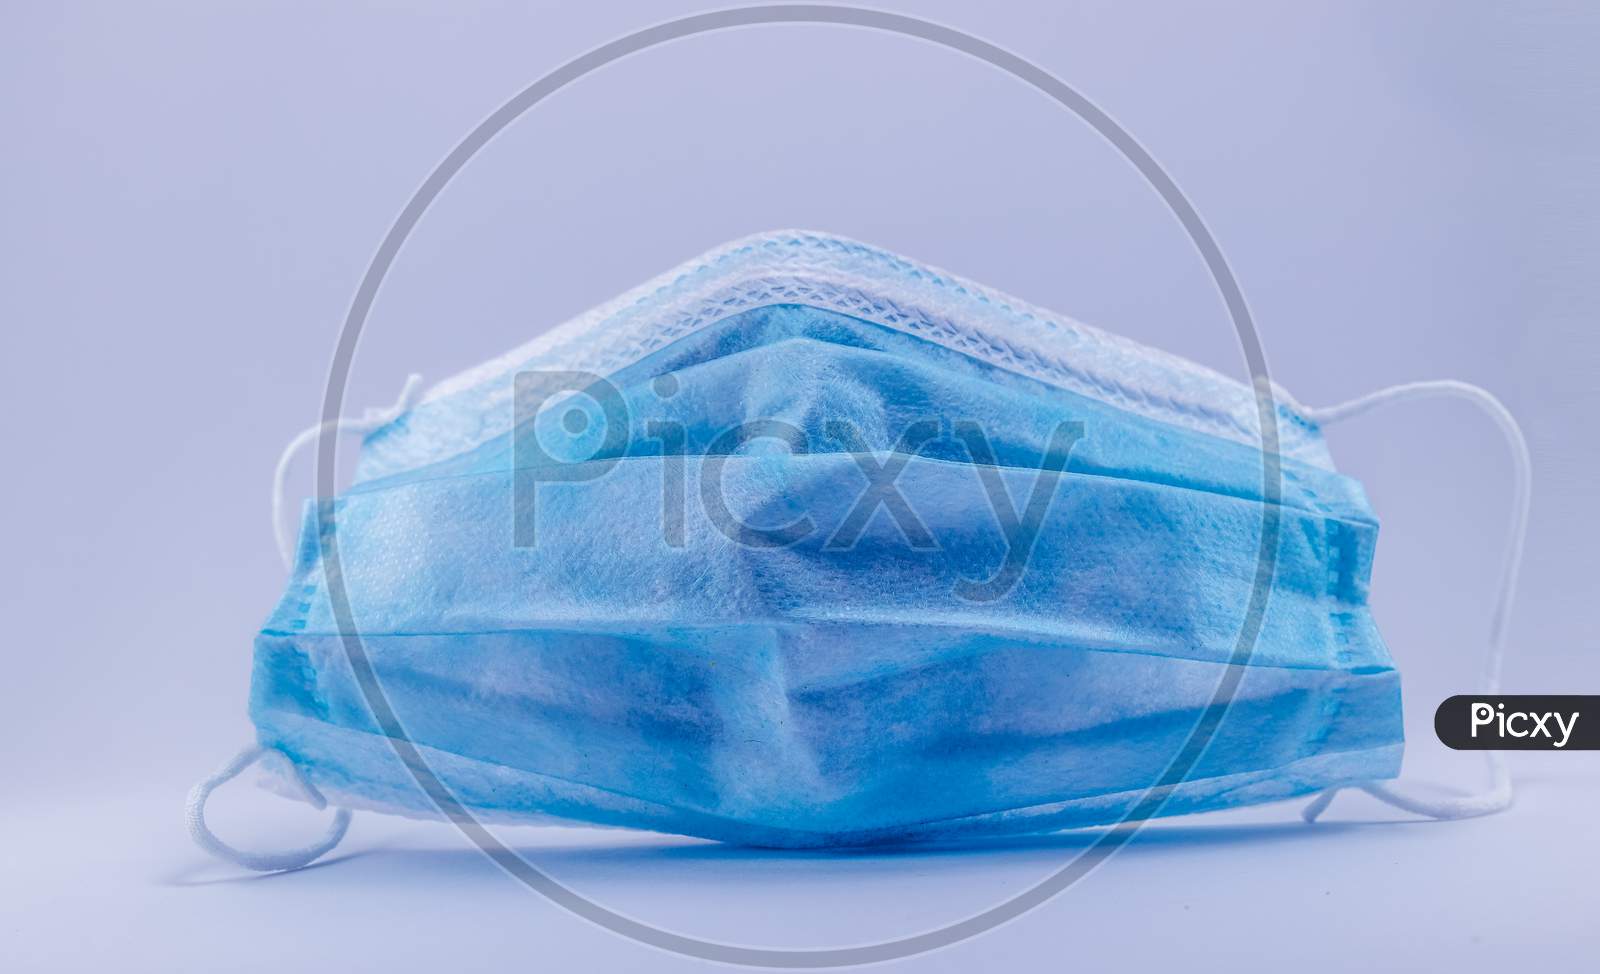 Surgical mask for protection against the pandemic. Covid-19 protective measures.